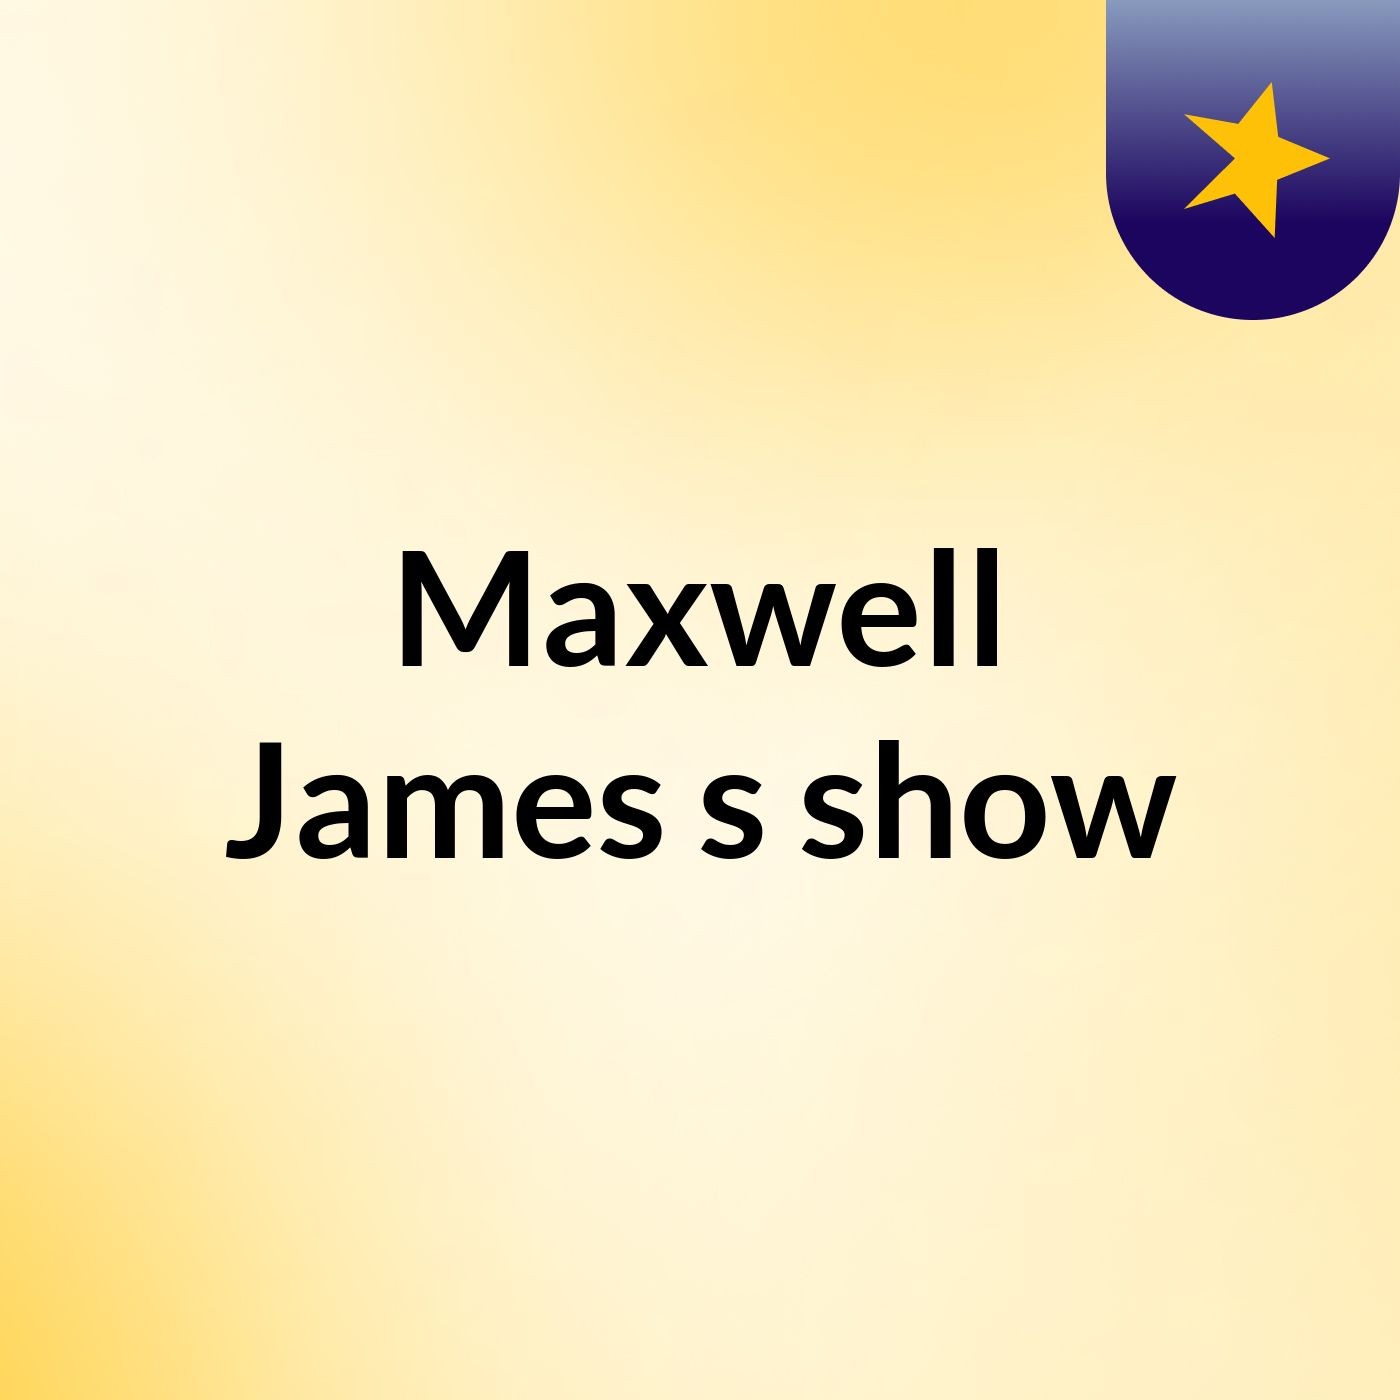 Maxwell James's show